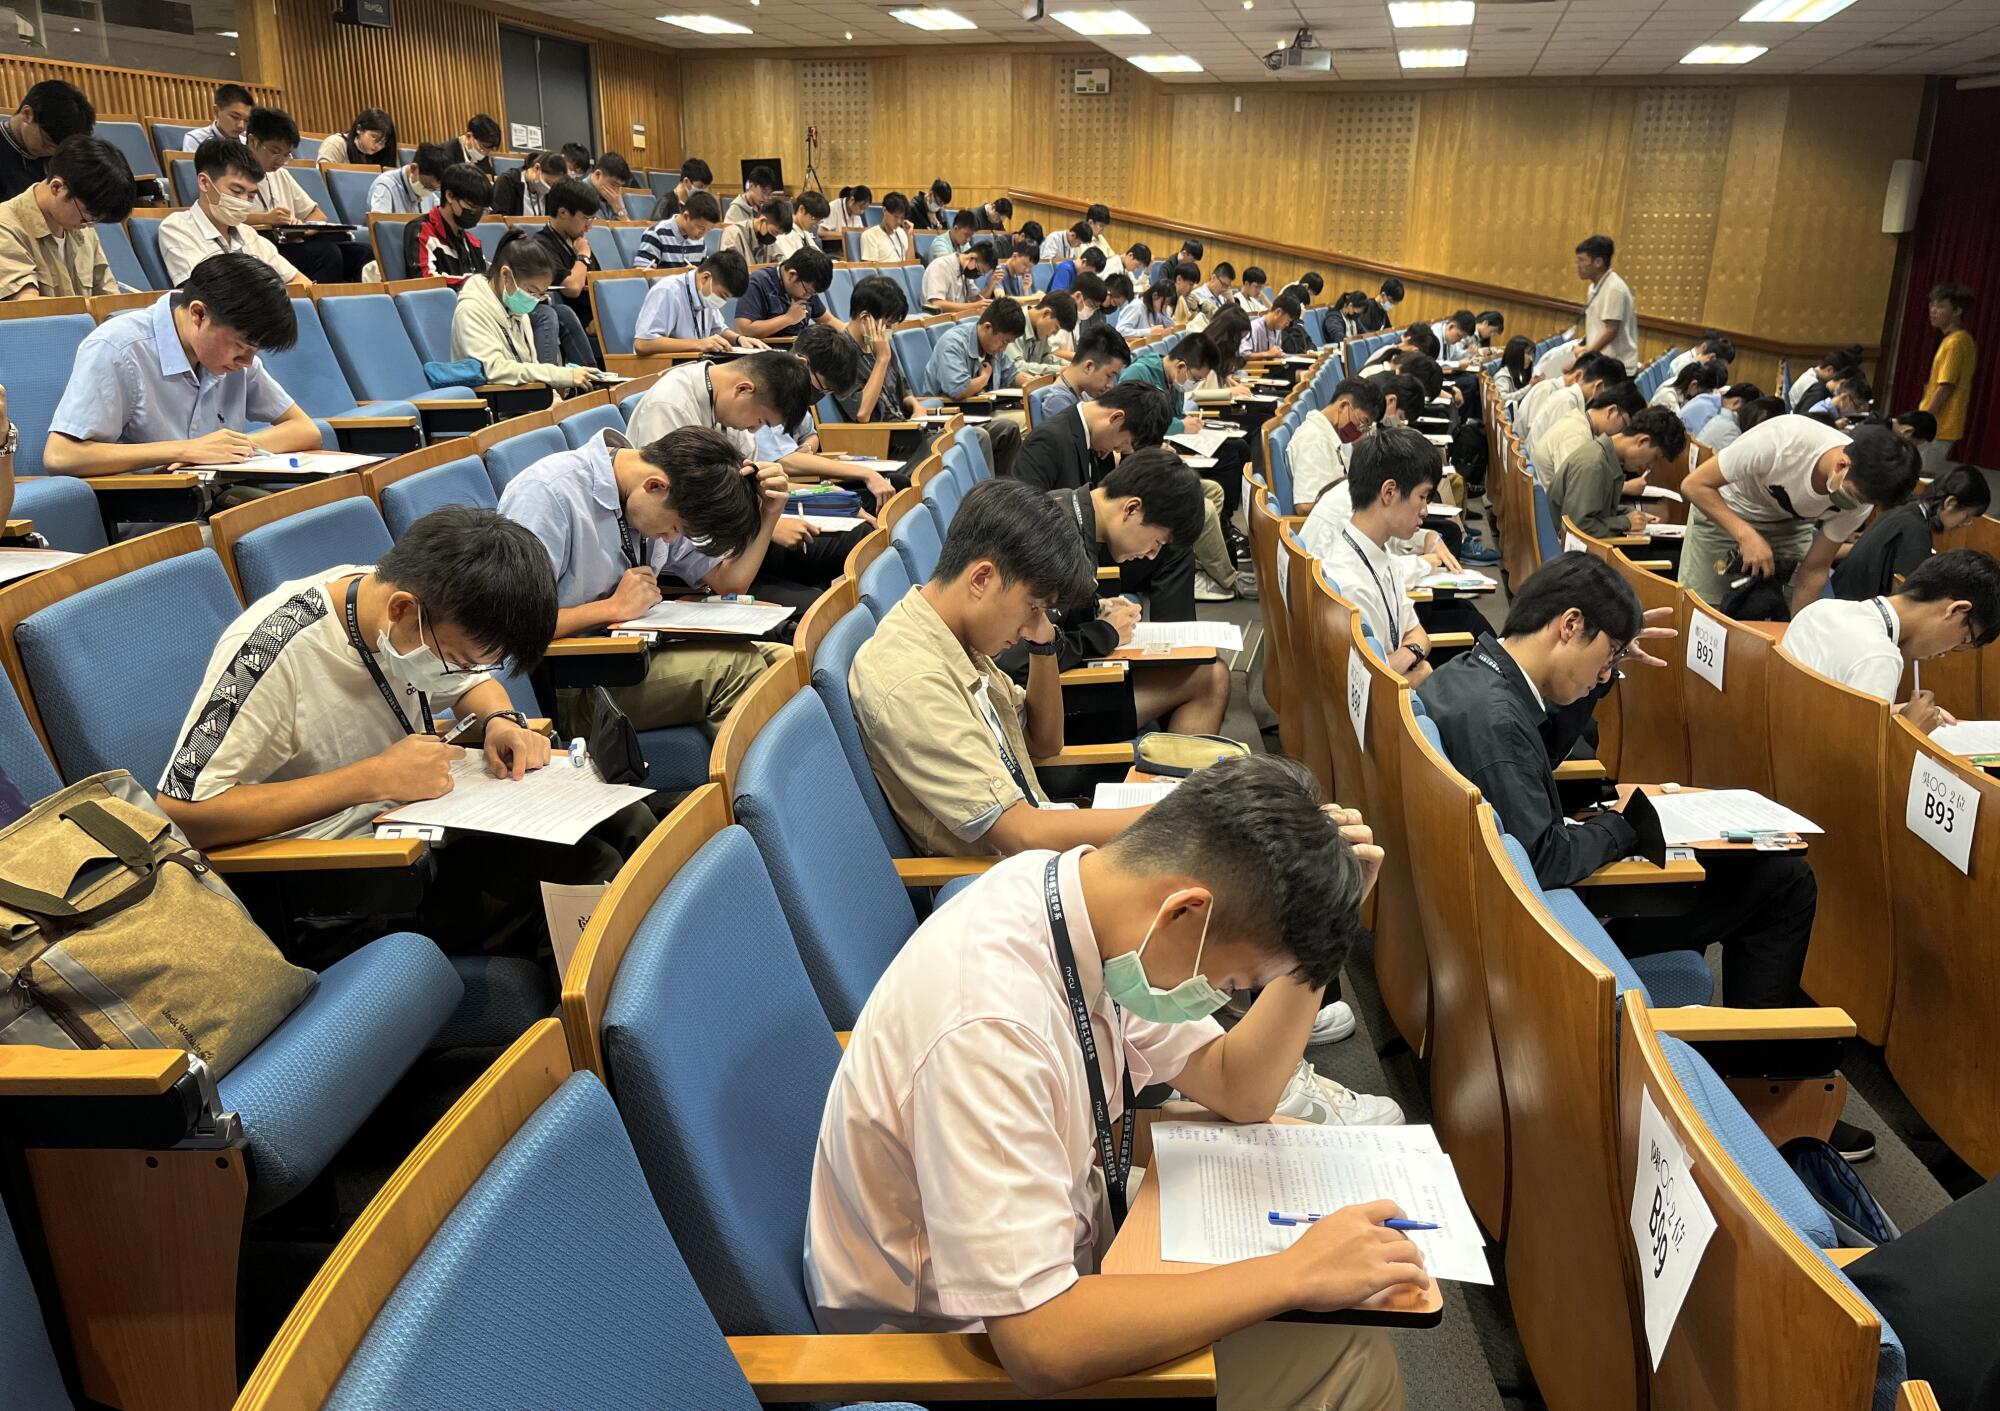 Rows of examinees sitting in an auditorium-style room